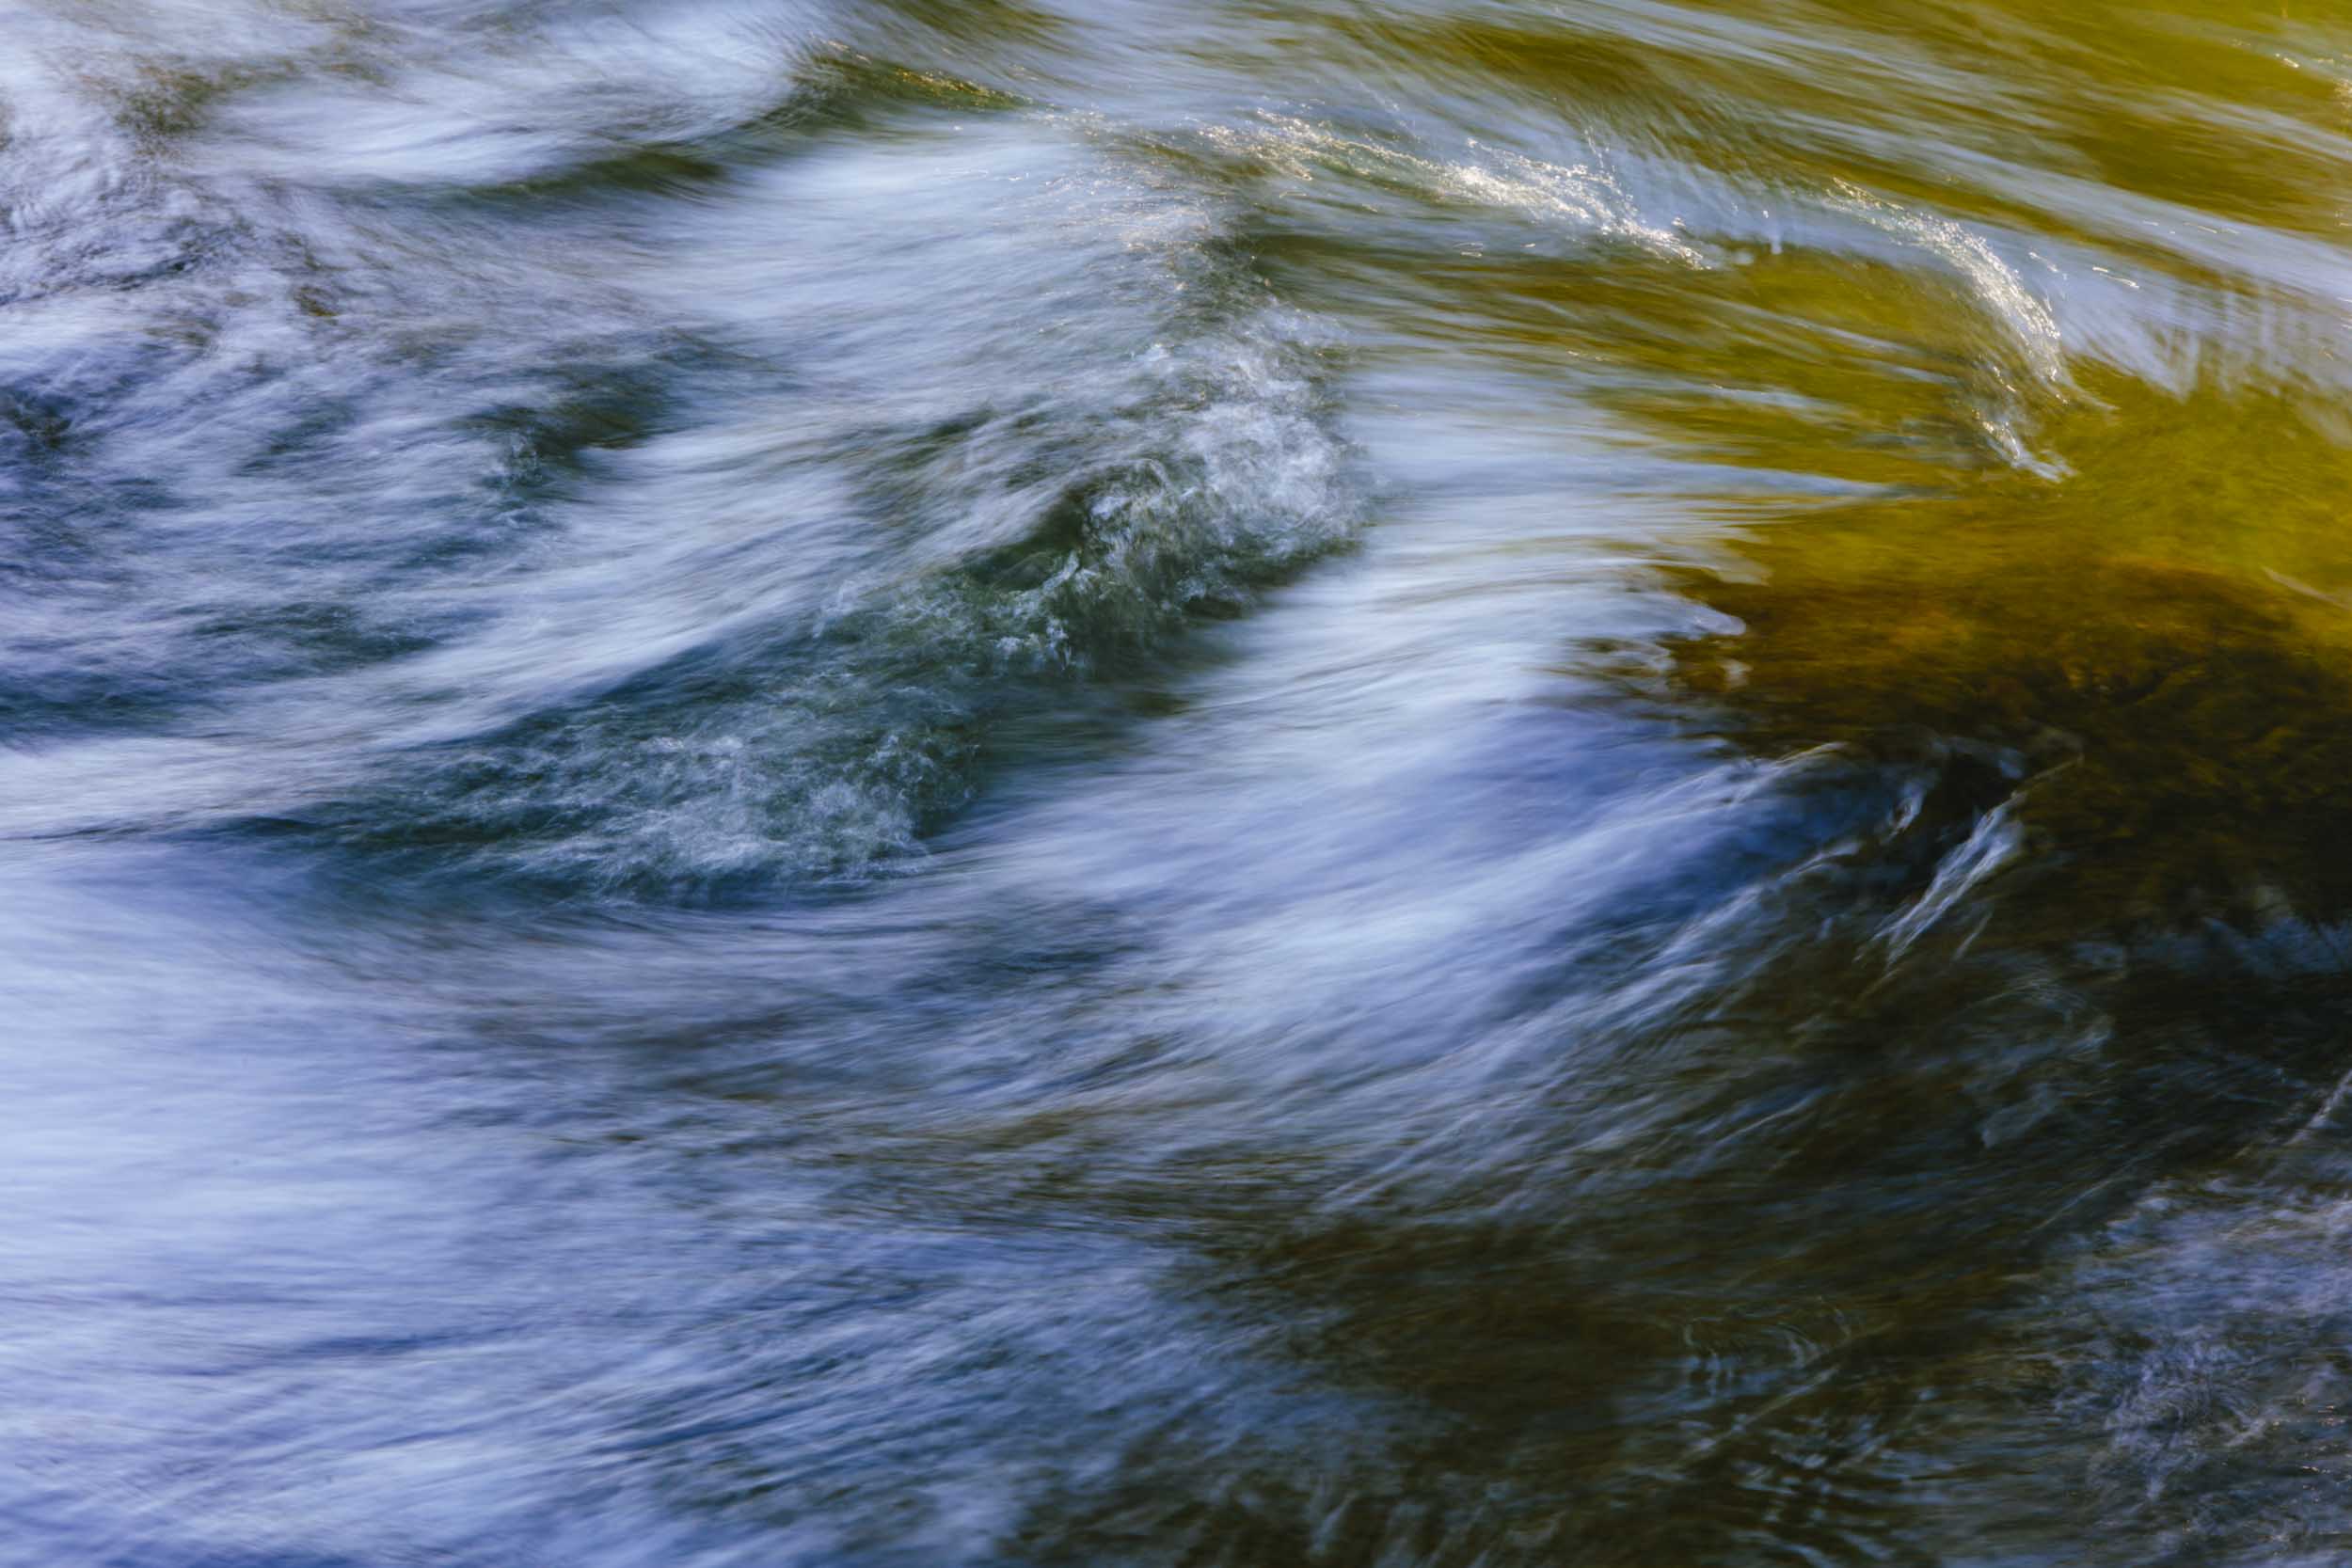 20190613_water_29178